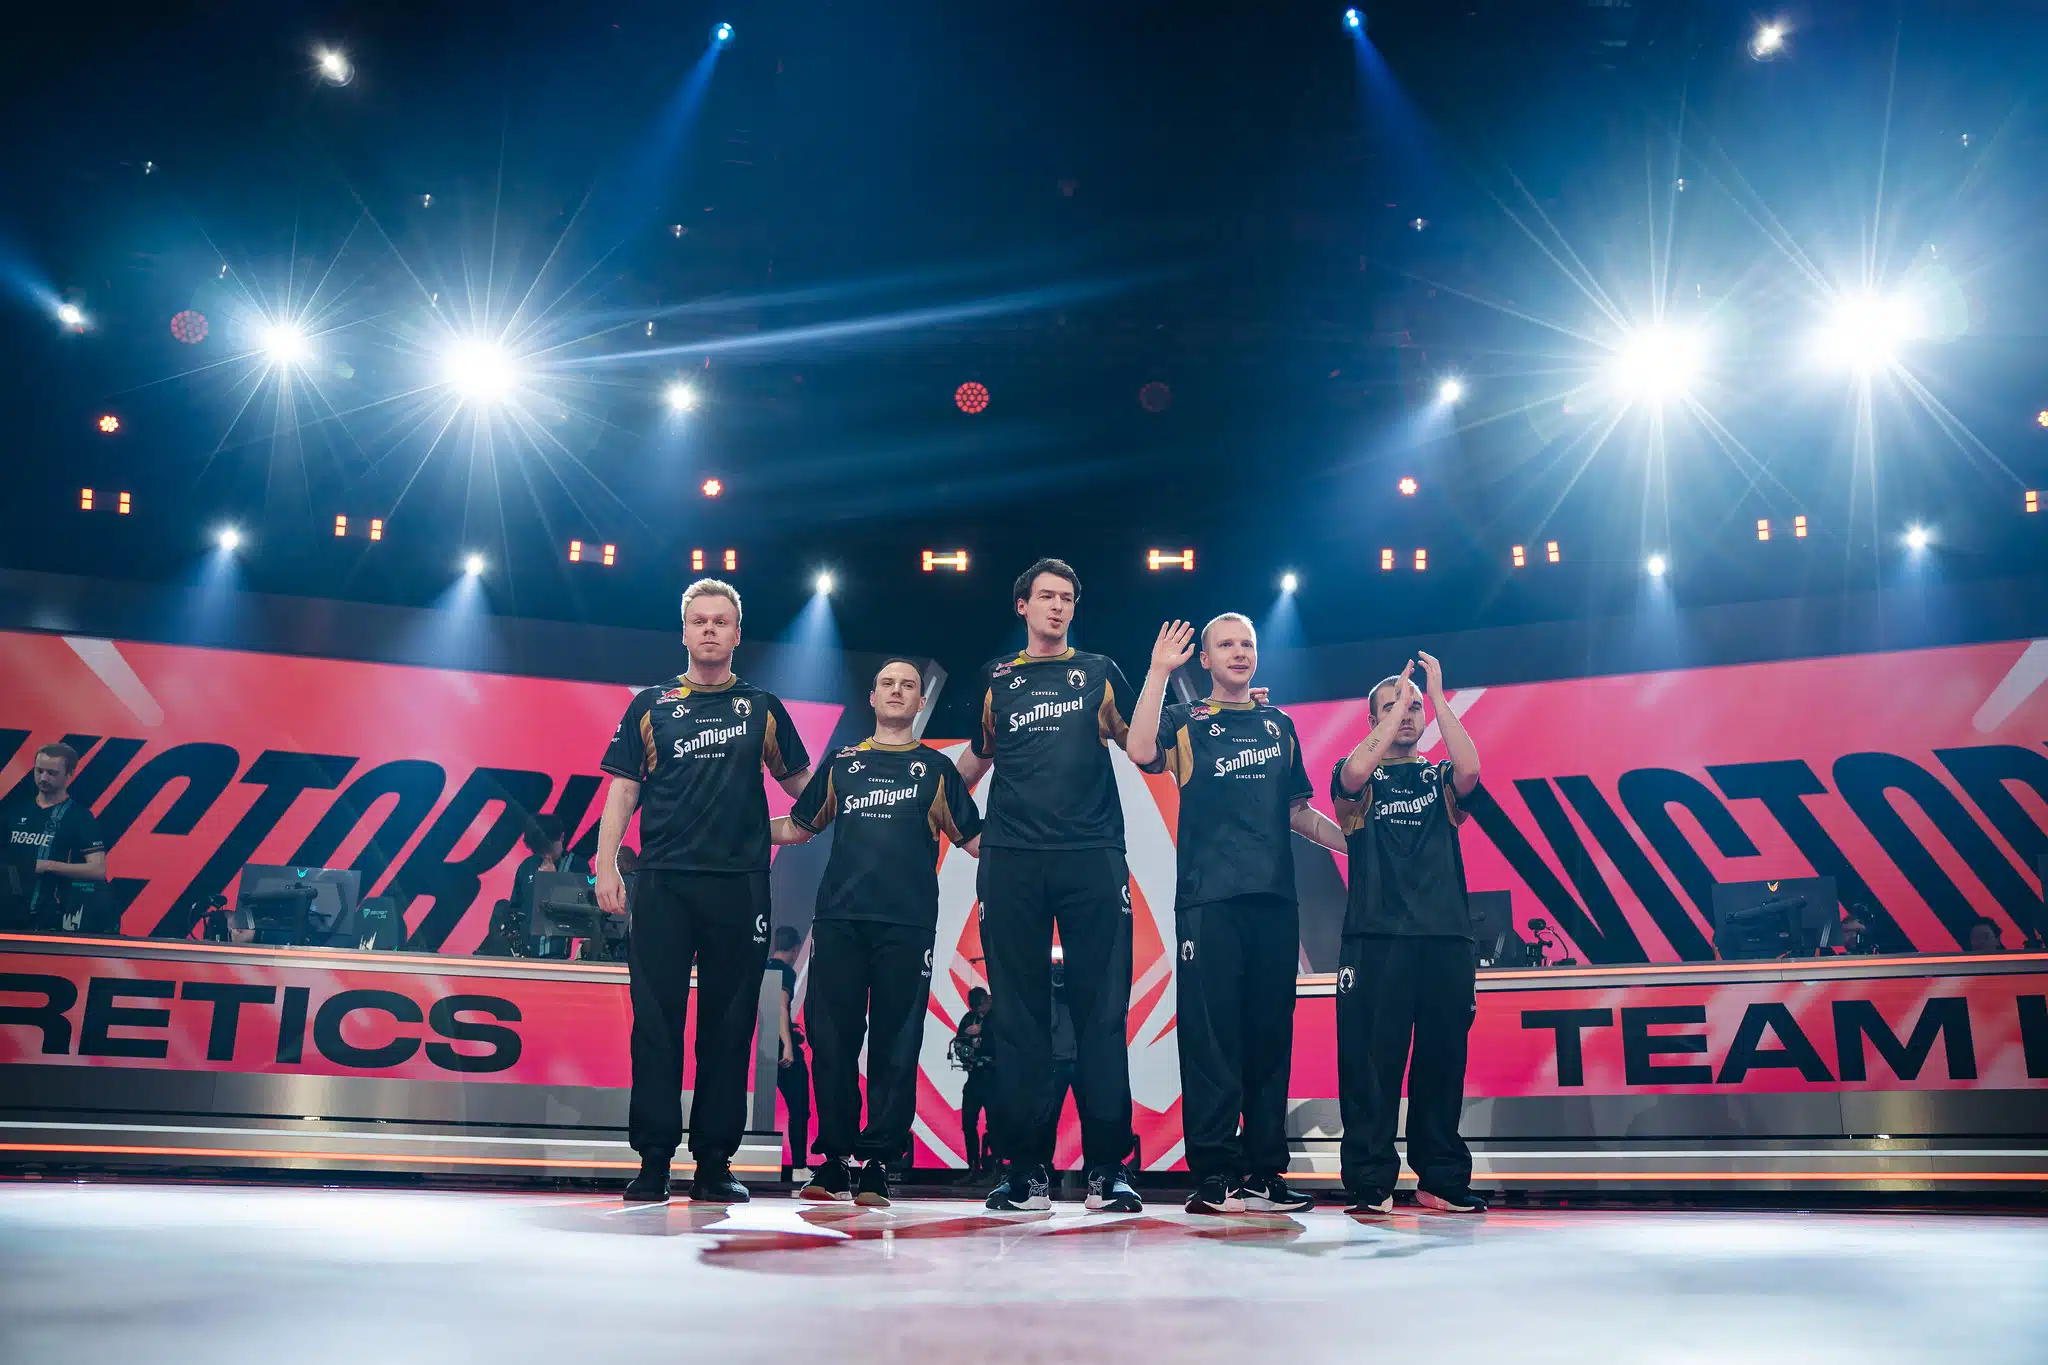 Team Heretics celebrate a win at the Riot Games Arena (Photo by Wojciech Wandzel/Riot Games)